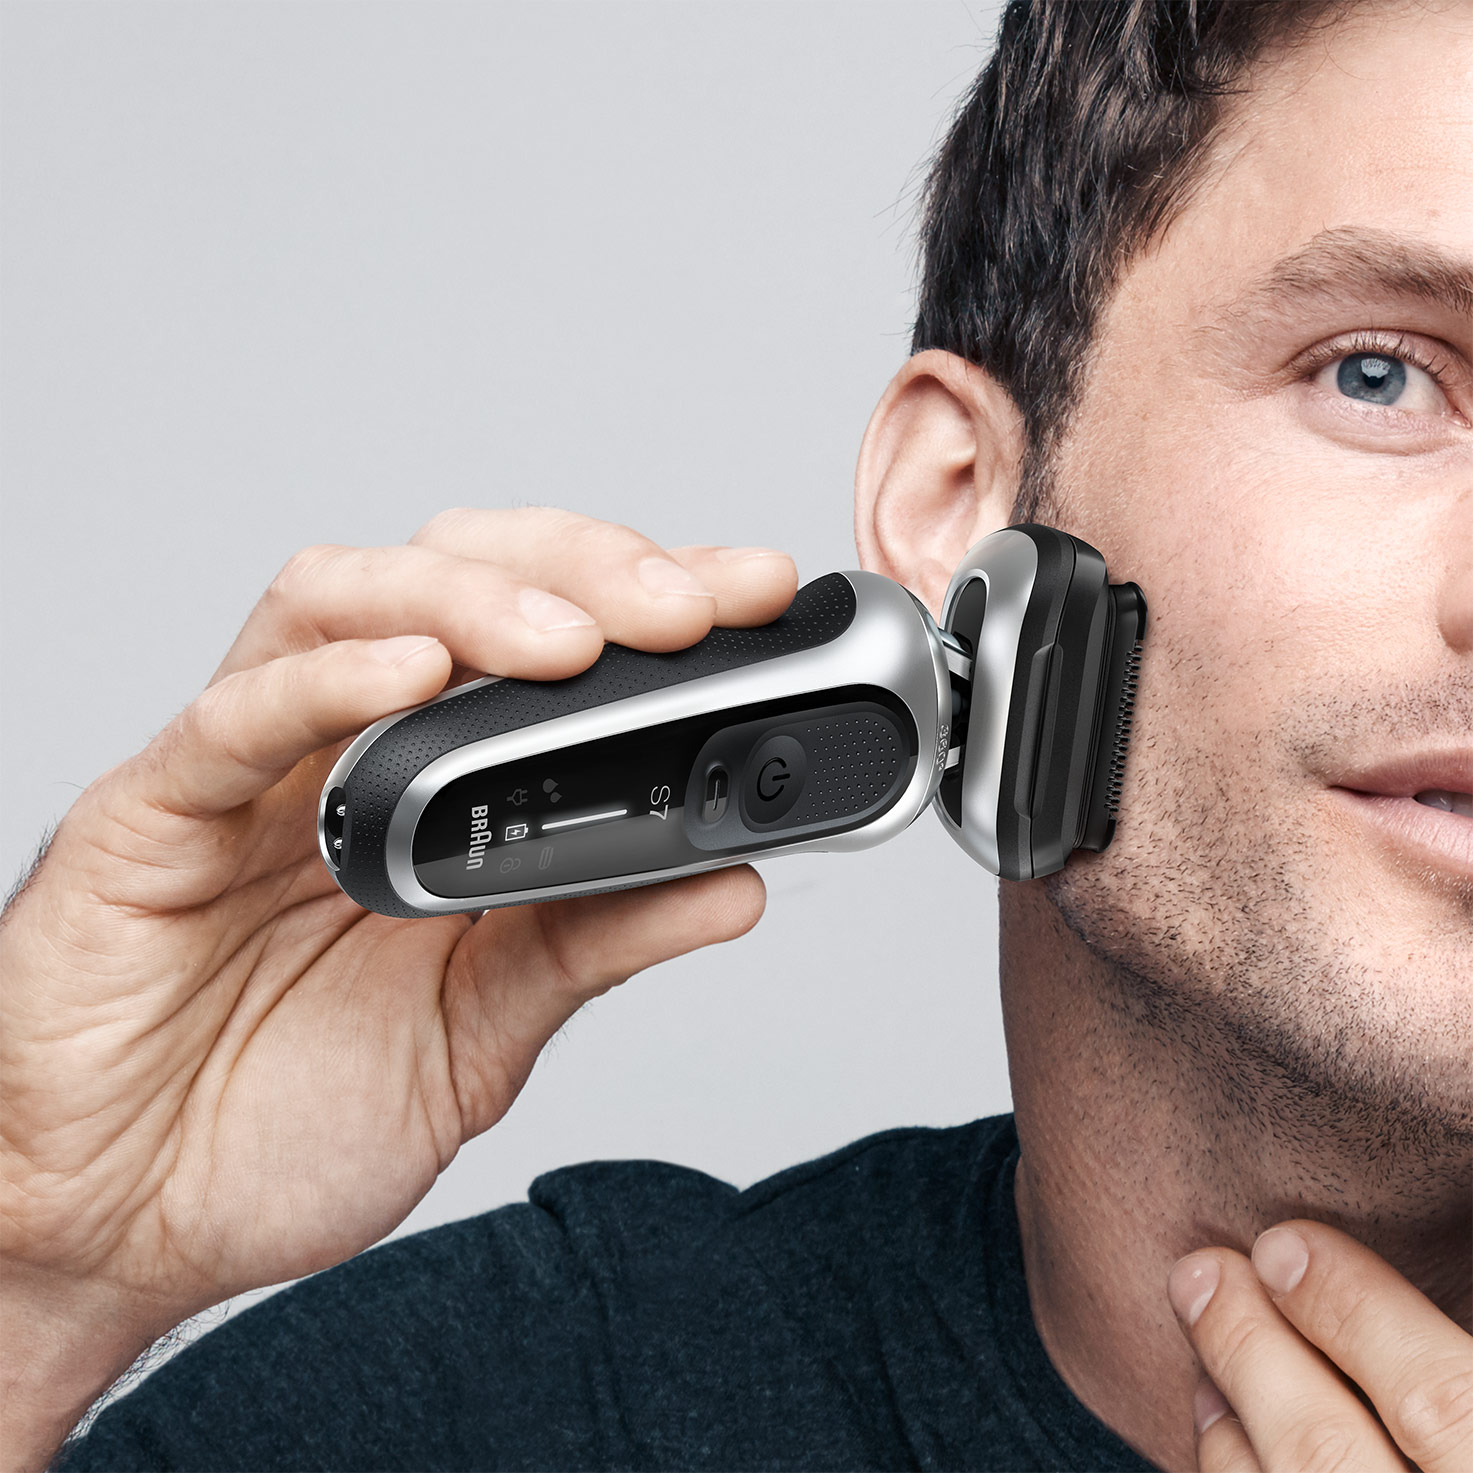 EasyClick Stubble Beard Trimmer attachment for Braun Series 5, 6 and 7 electric shaver 